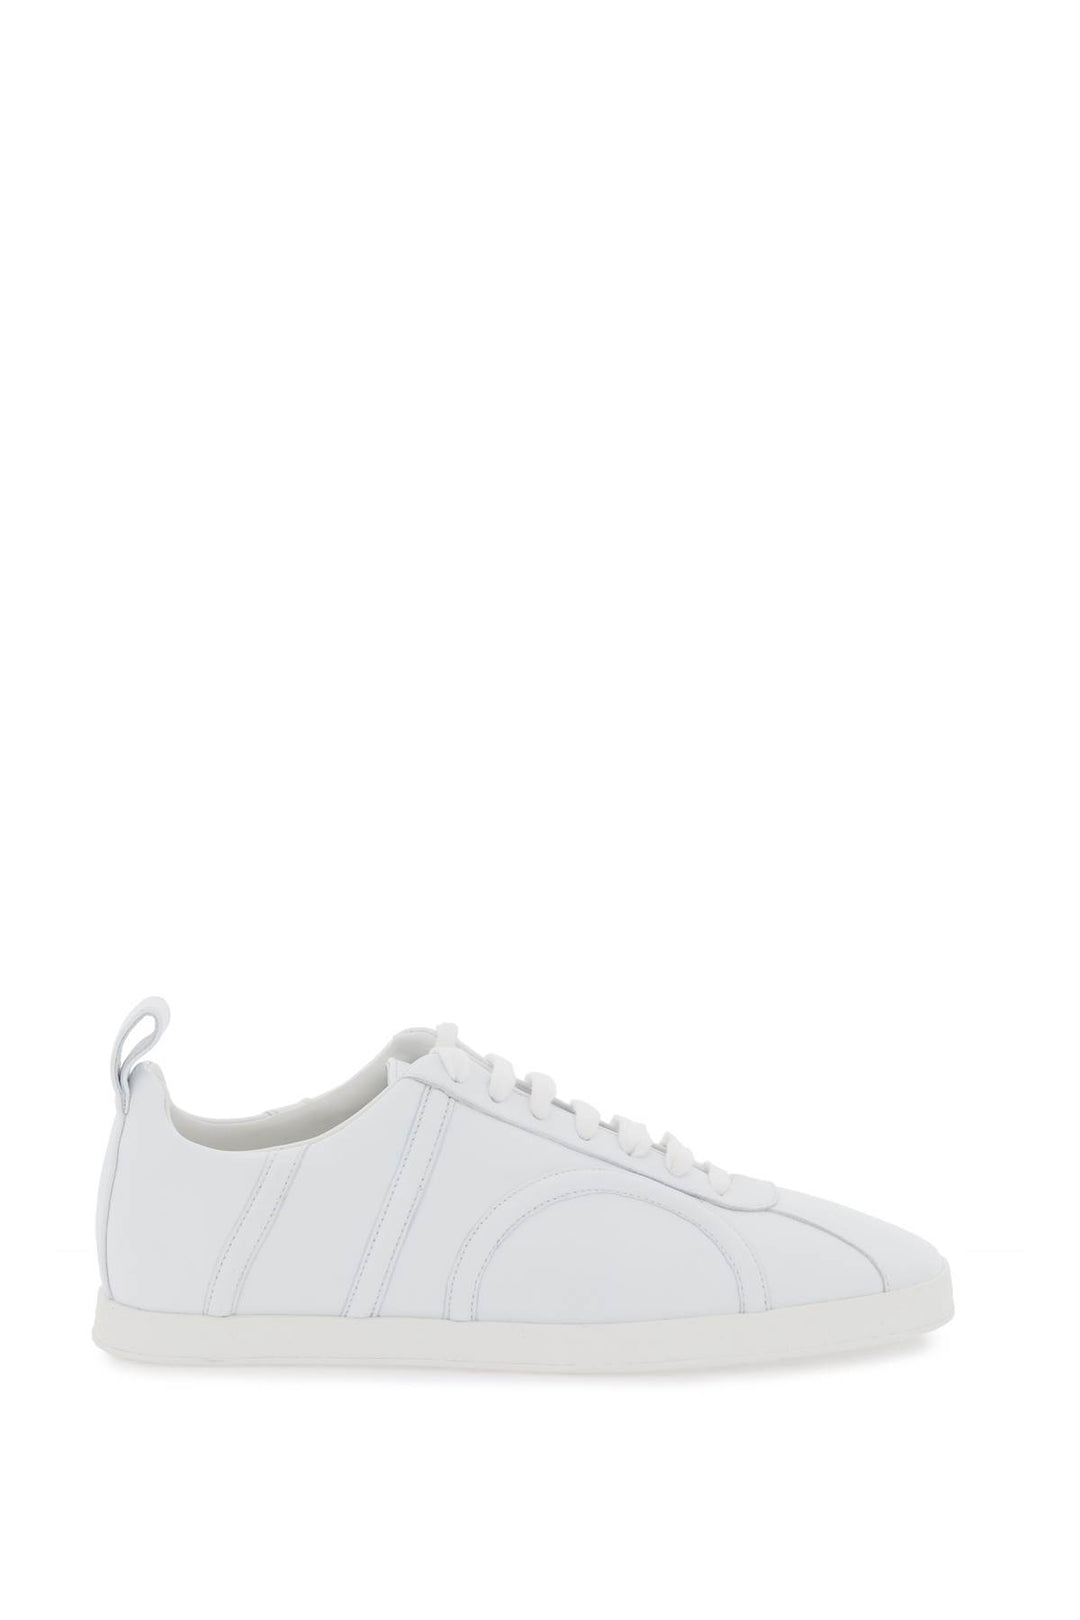 Toteme Leather Sneakers   White